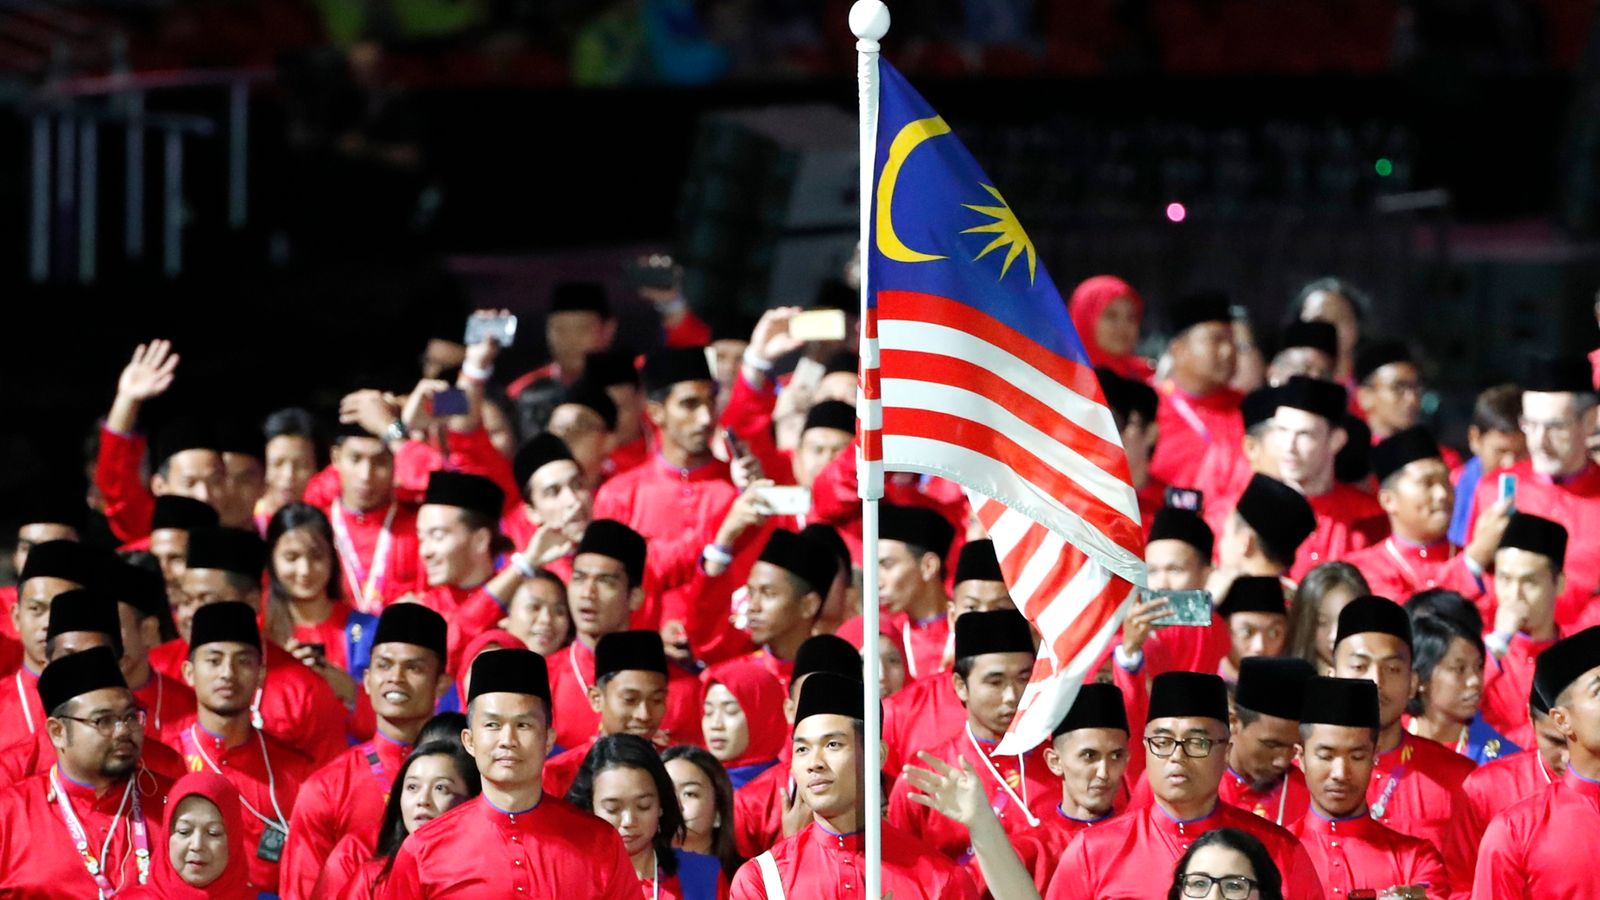 Malaysia becomes second country to reject hosting 2026 Commonwealth Games